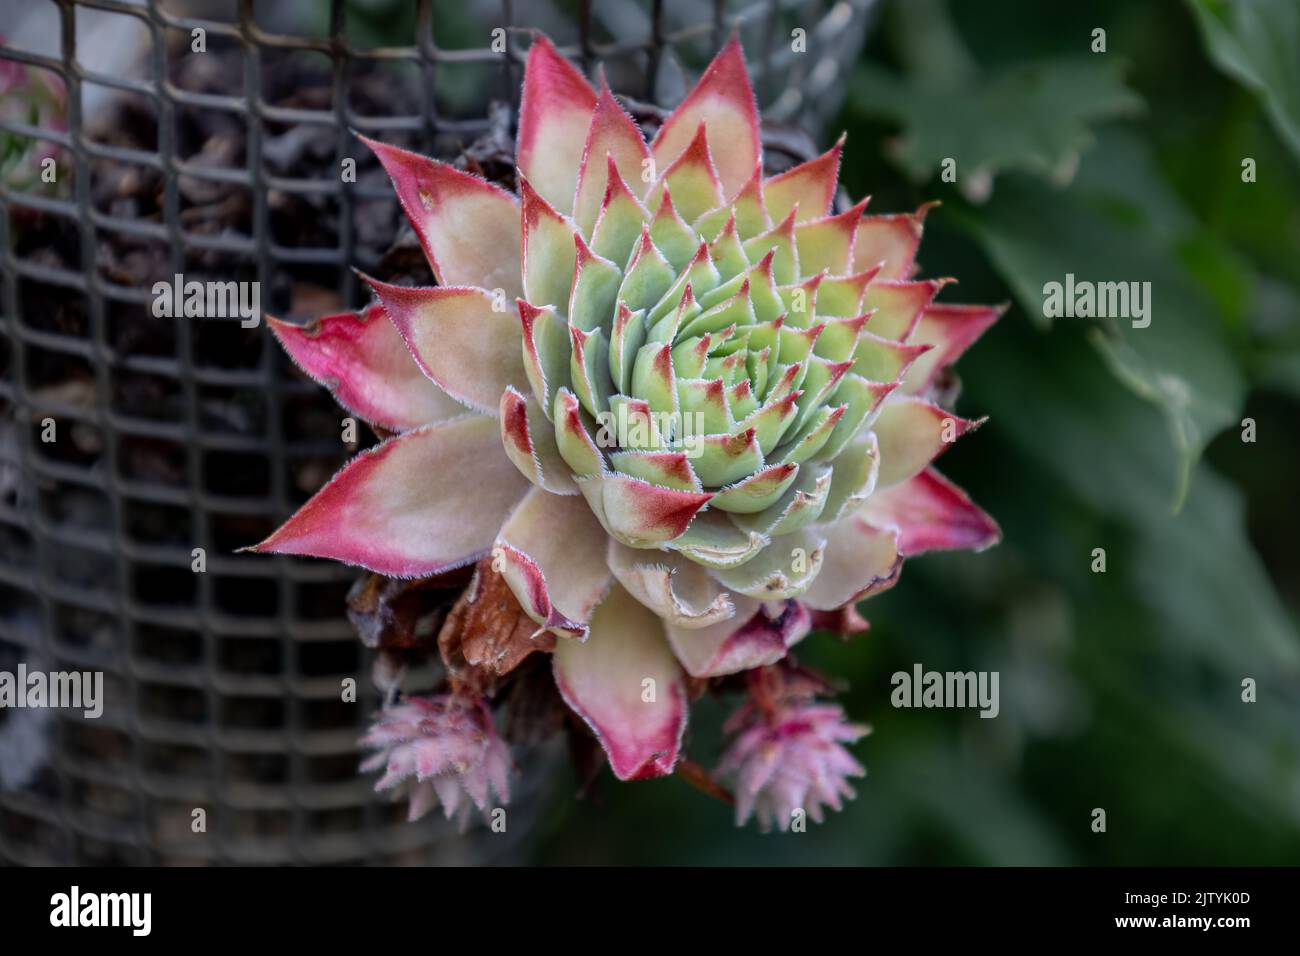 Sempervivum an evergreen succulent in the family of sedum species. Semper means always and vivus means life, so the name of the plant is always life i Stock Photo